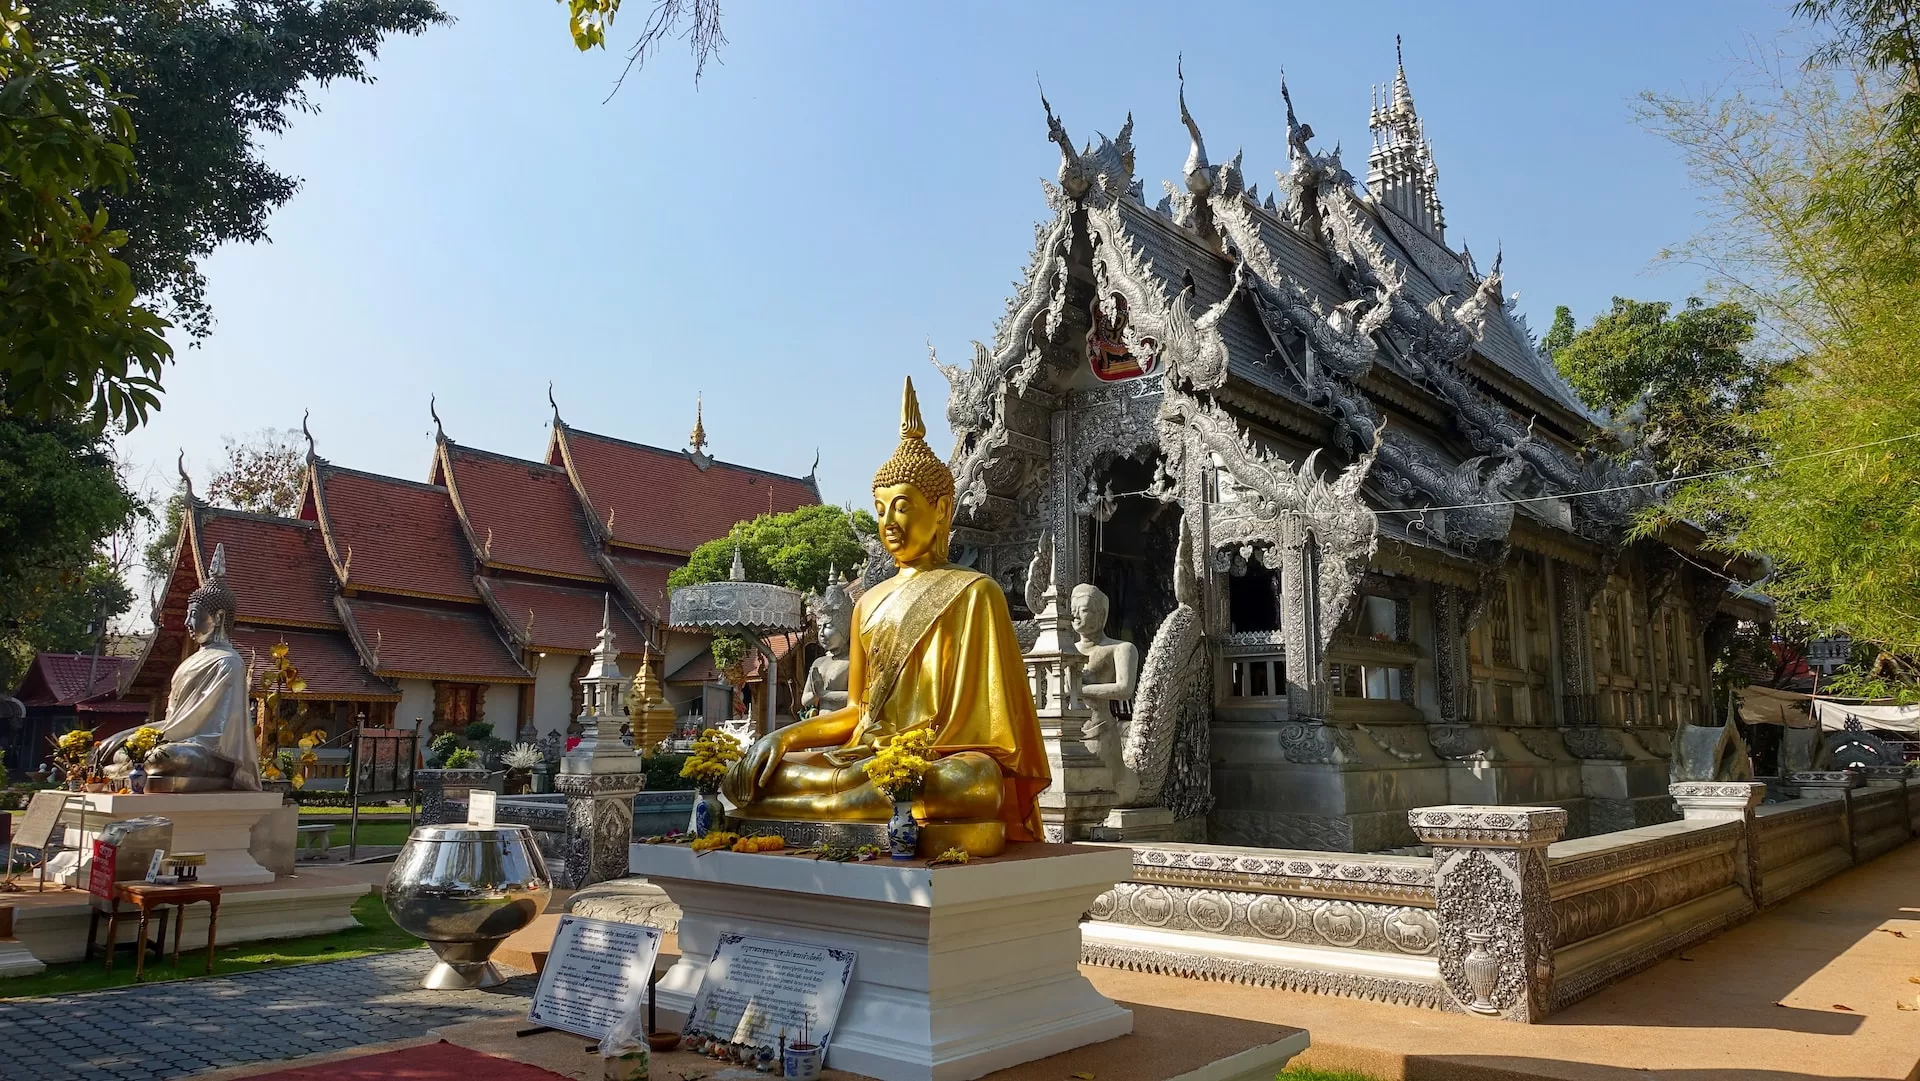 Want to Learn Thai? Here are the best Thai language schools in Chiang Mai